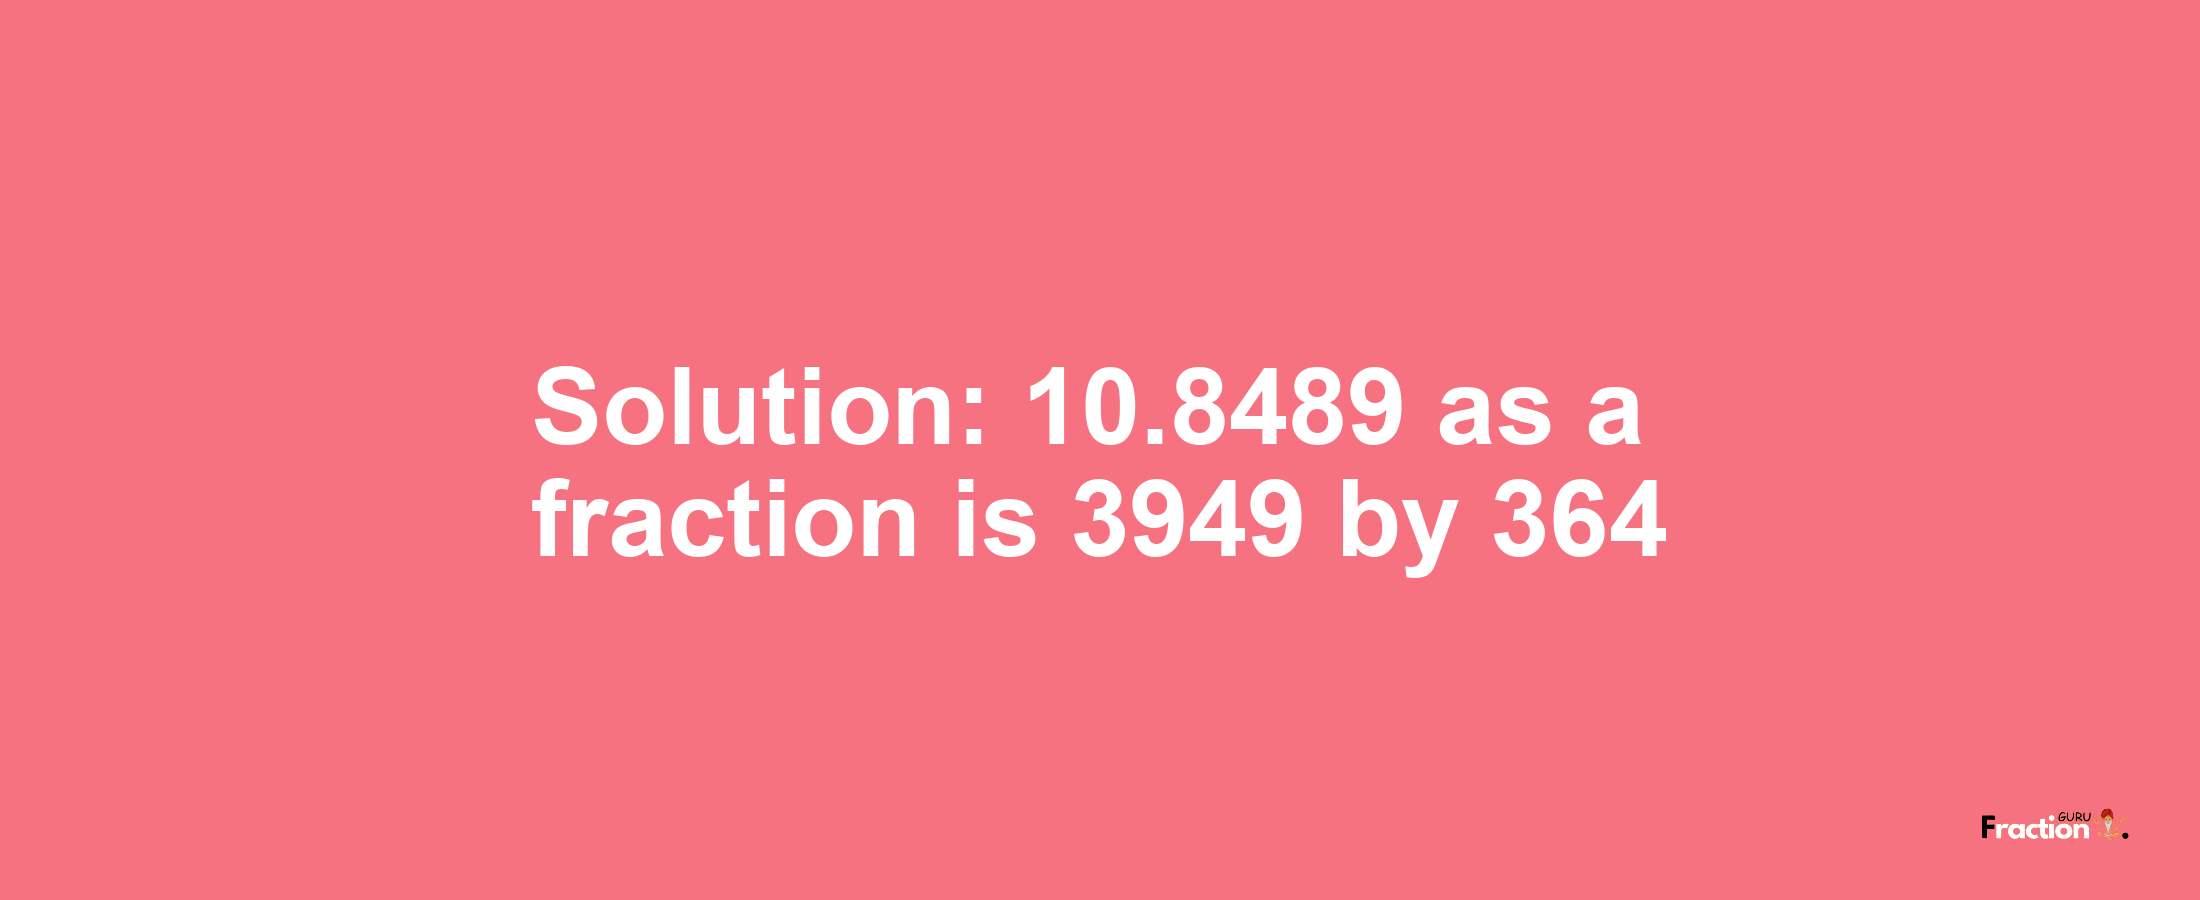 Solution:10.8489 as a fraction is 3949/364